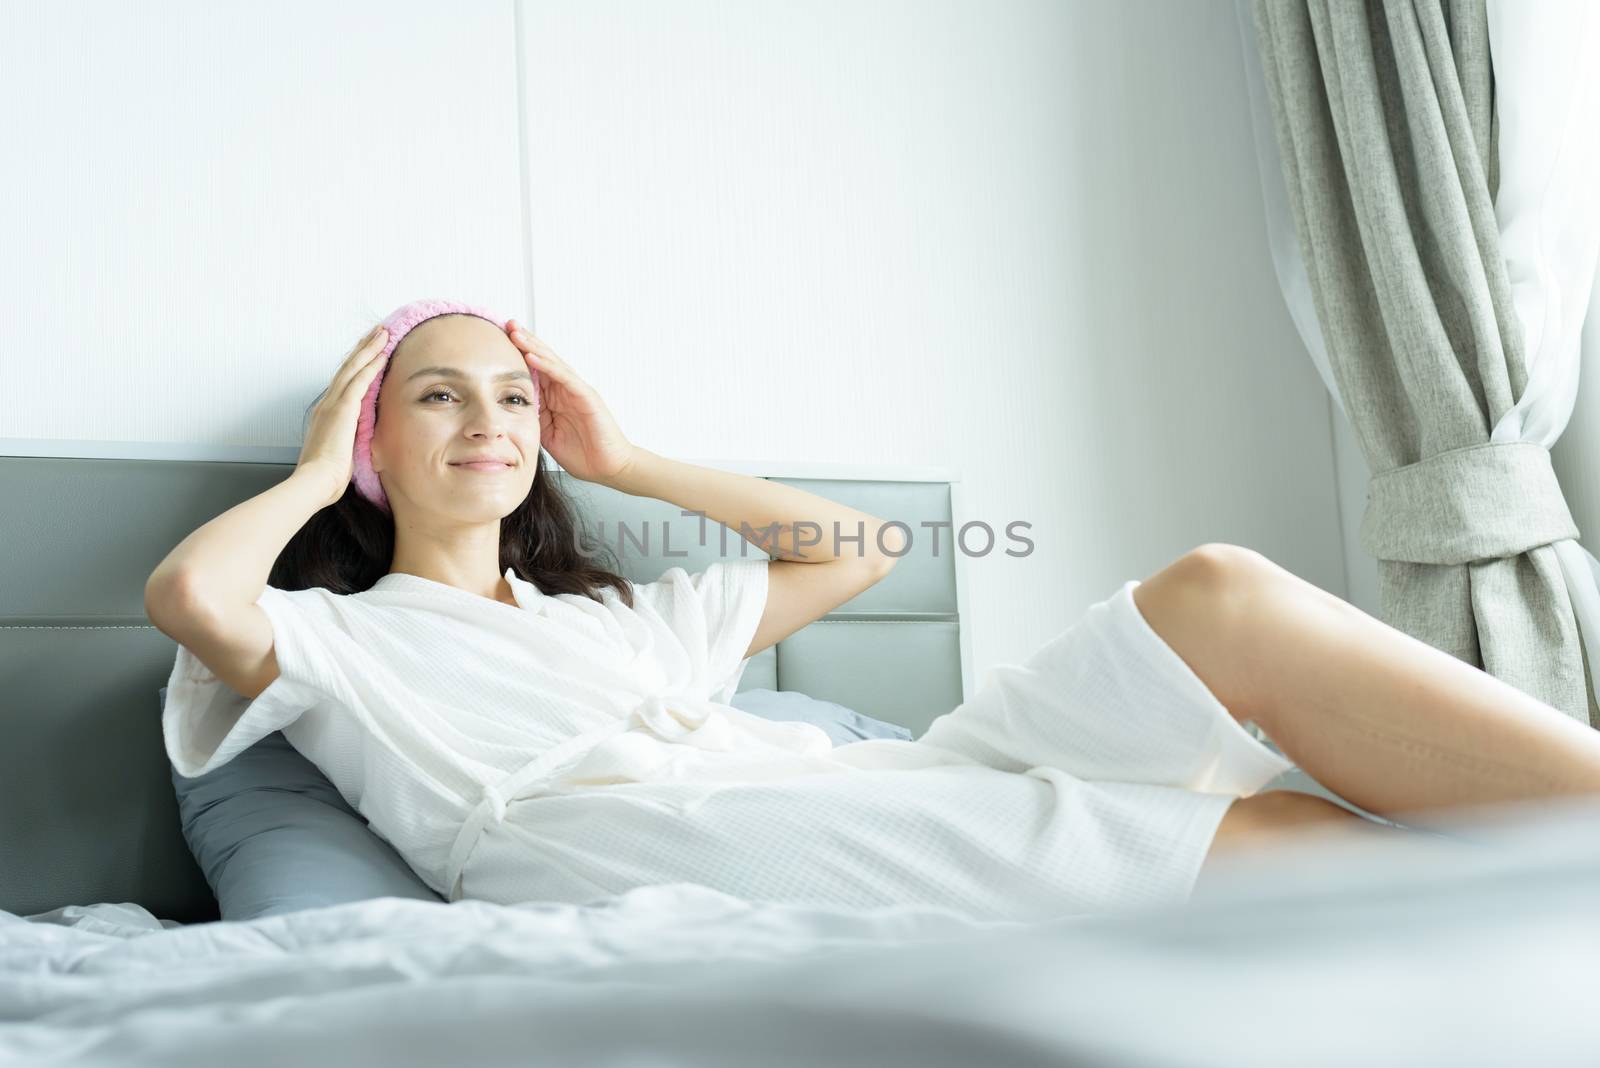 A beautiful woman wearing a towel and a white bathrobe and pink headband with happy and relaxing on the bed at a condominium in the morning.